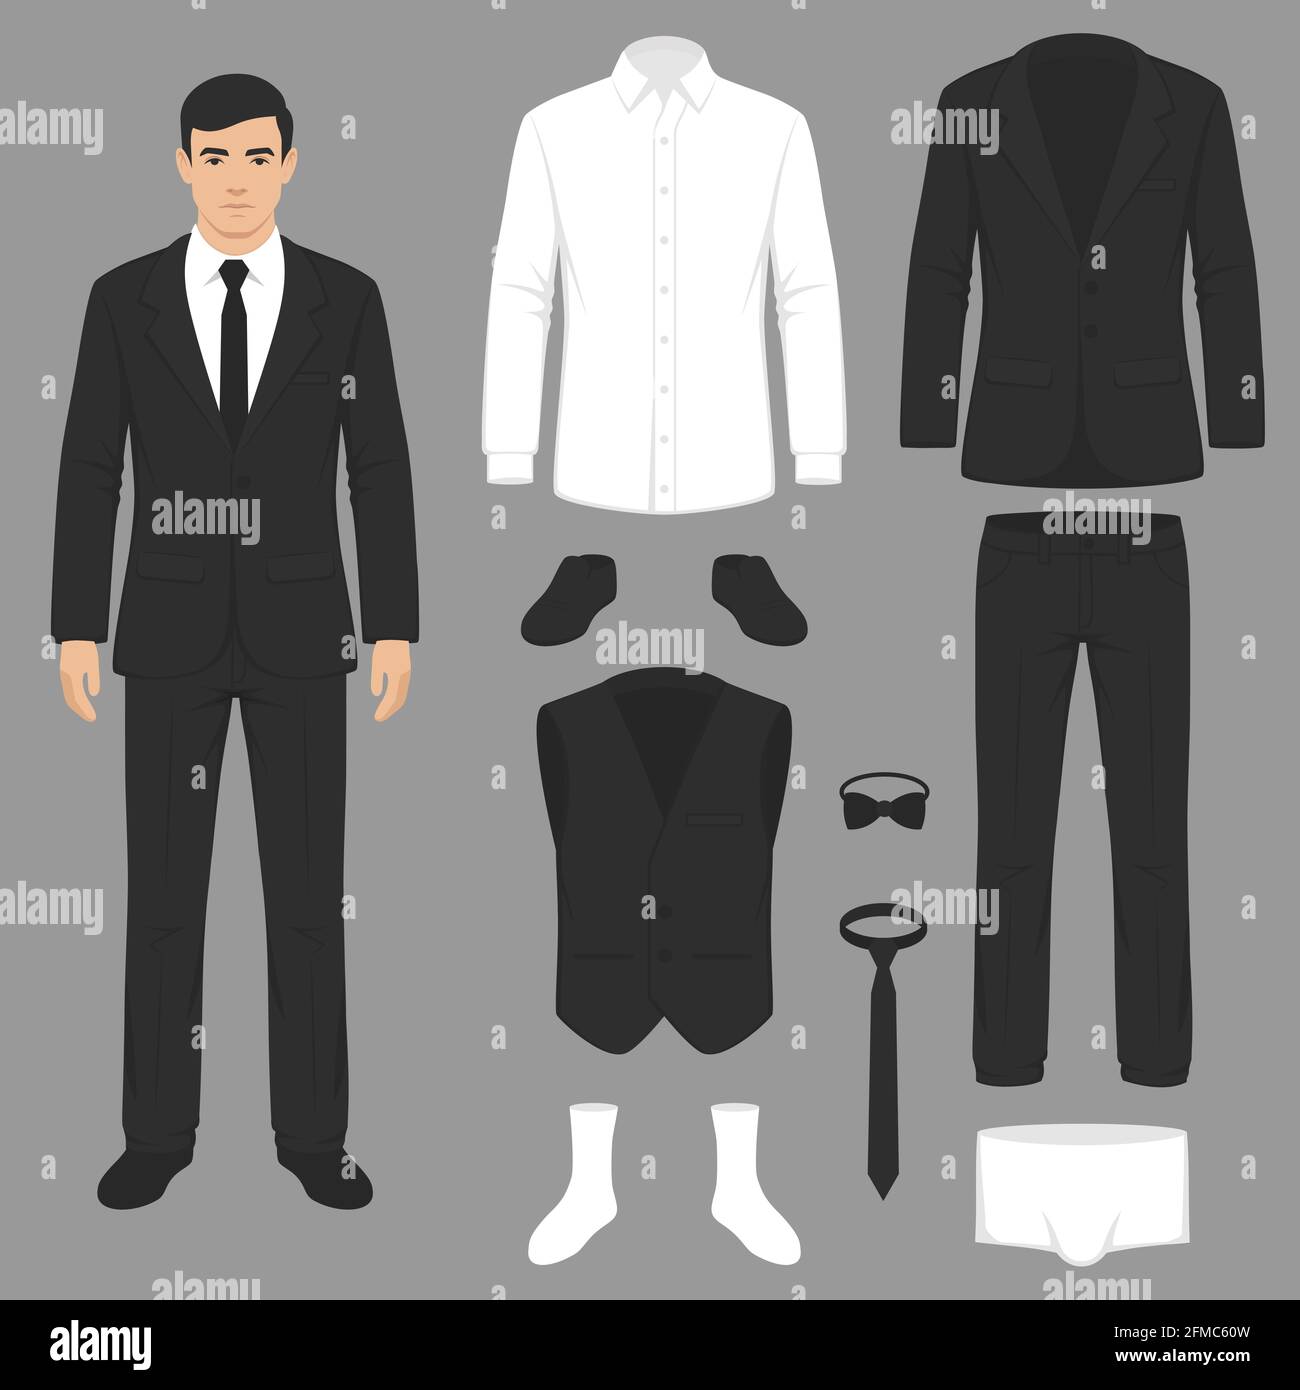 vector illustration of a men fashion, suit uniform, jacket, pants, shirt and shoes isolated Stock Vector